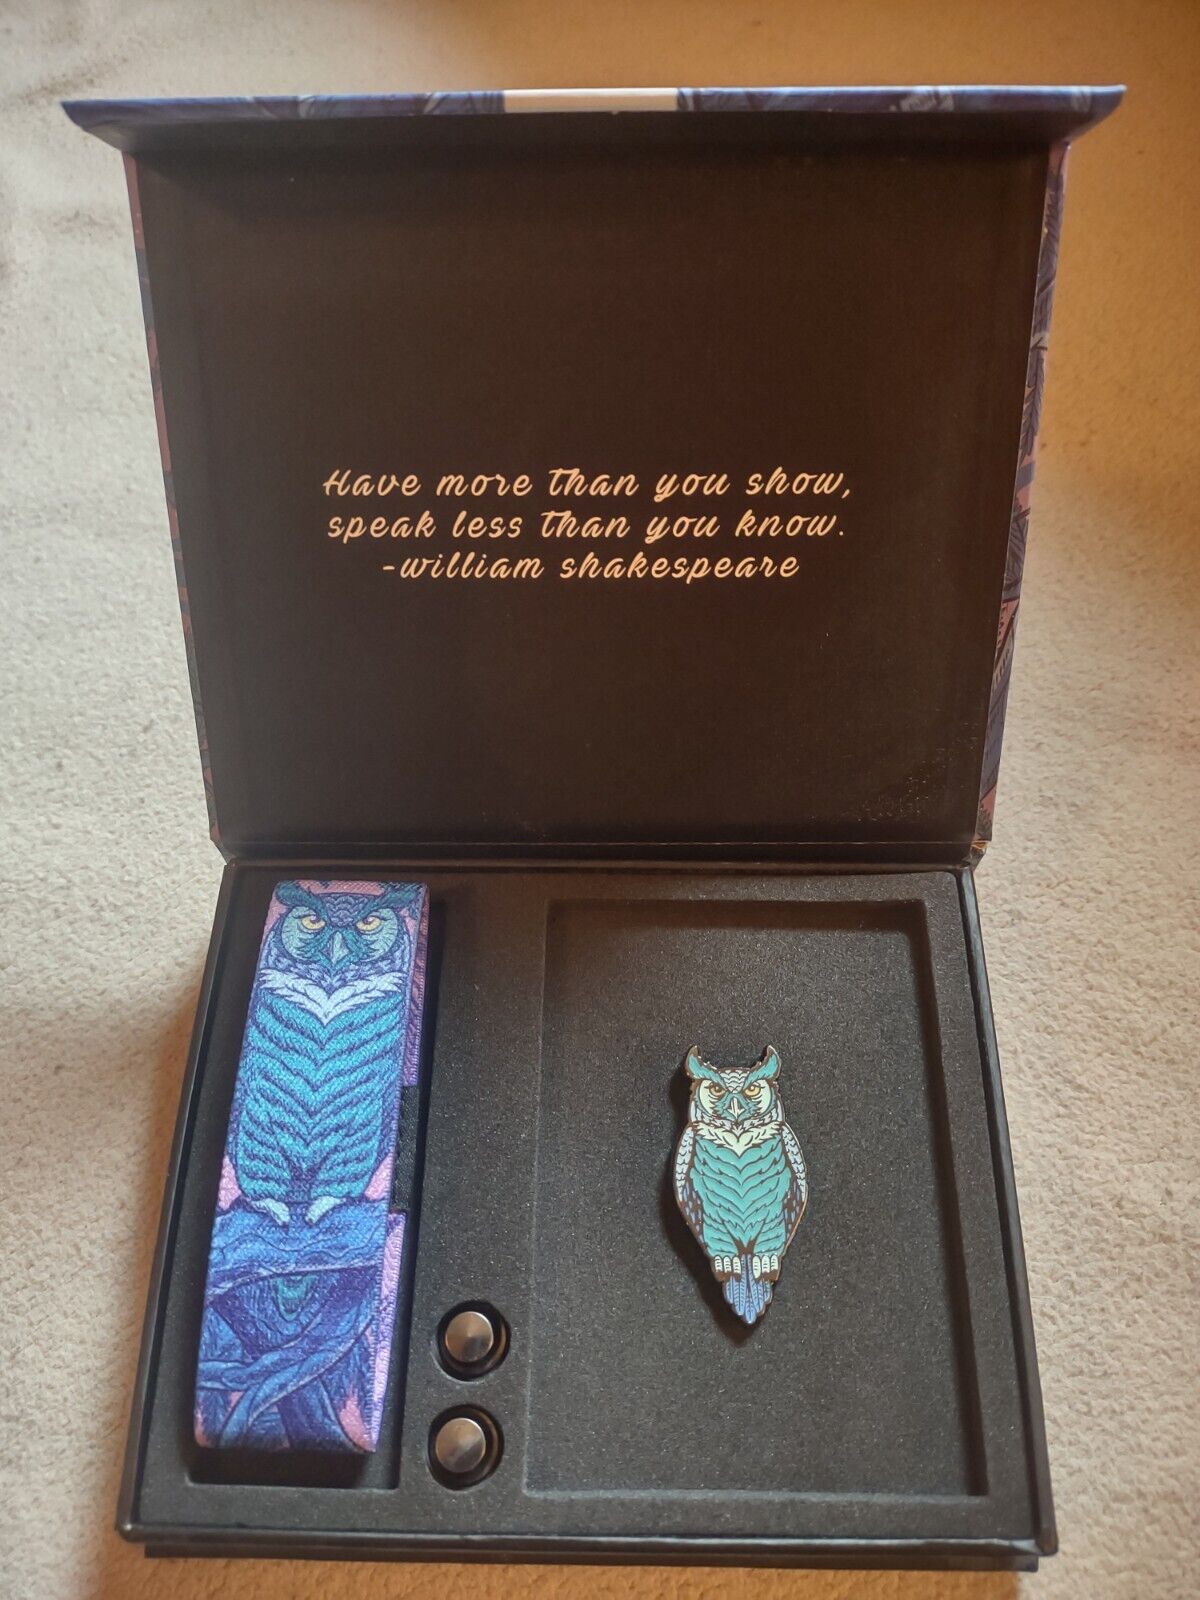 Rare ZOX Pearl box Stay Wise 🦉 owl Shakespeare quote wristband great horned pin